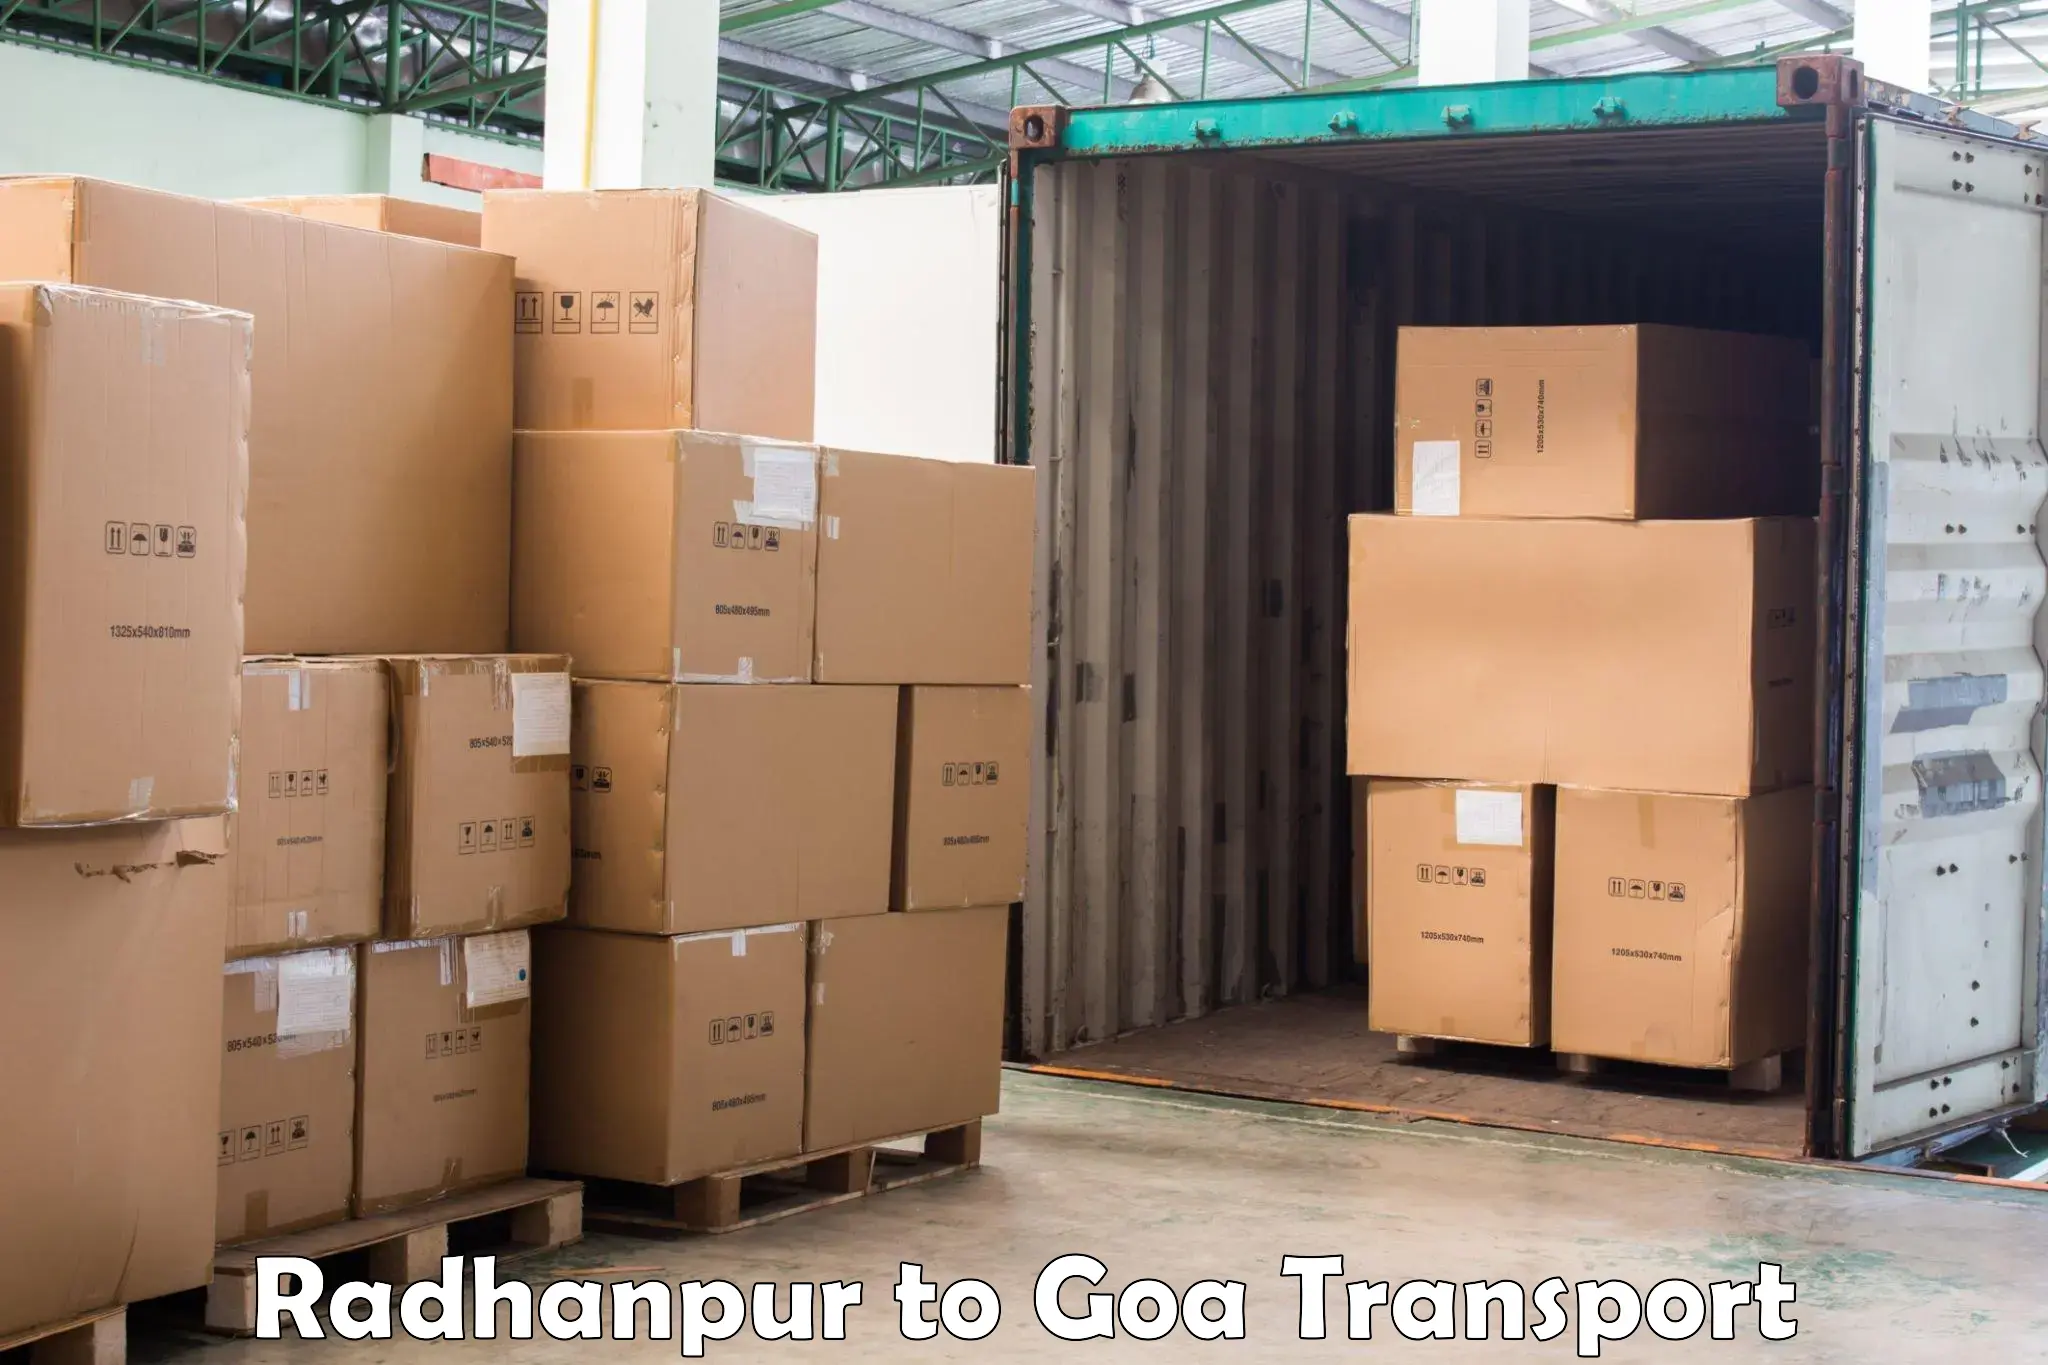 Delivery service Radhanpur to Panaji